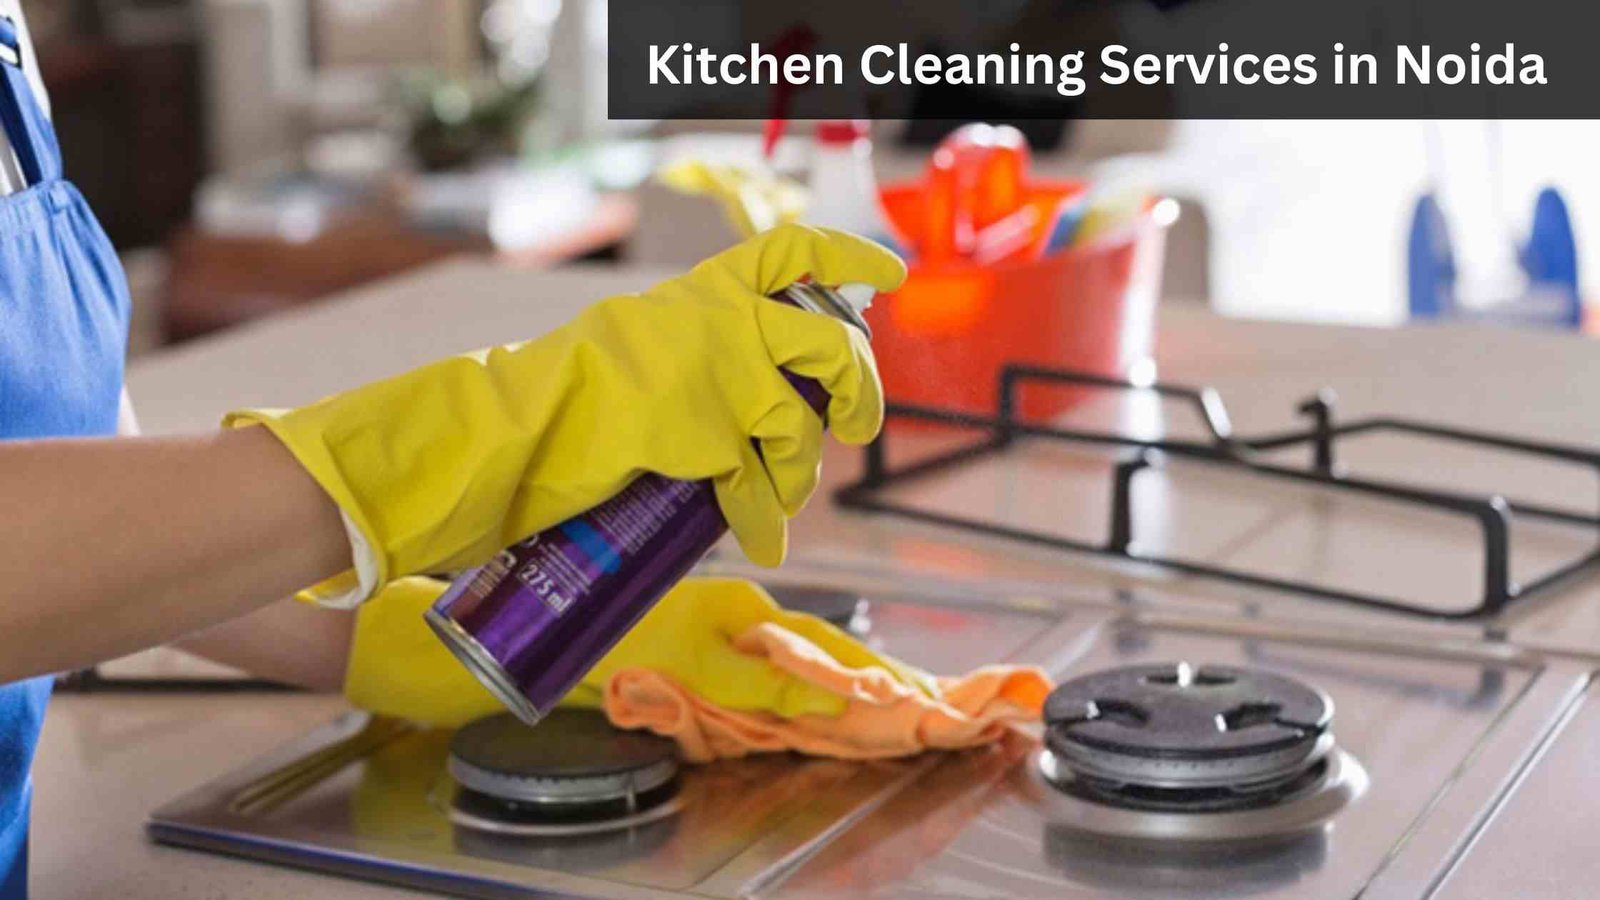 Kitchen Cleaning Services in Noida